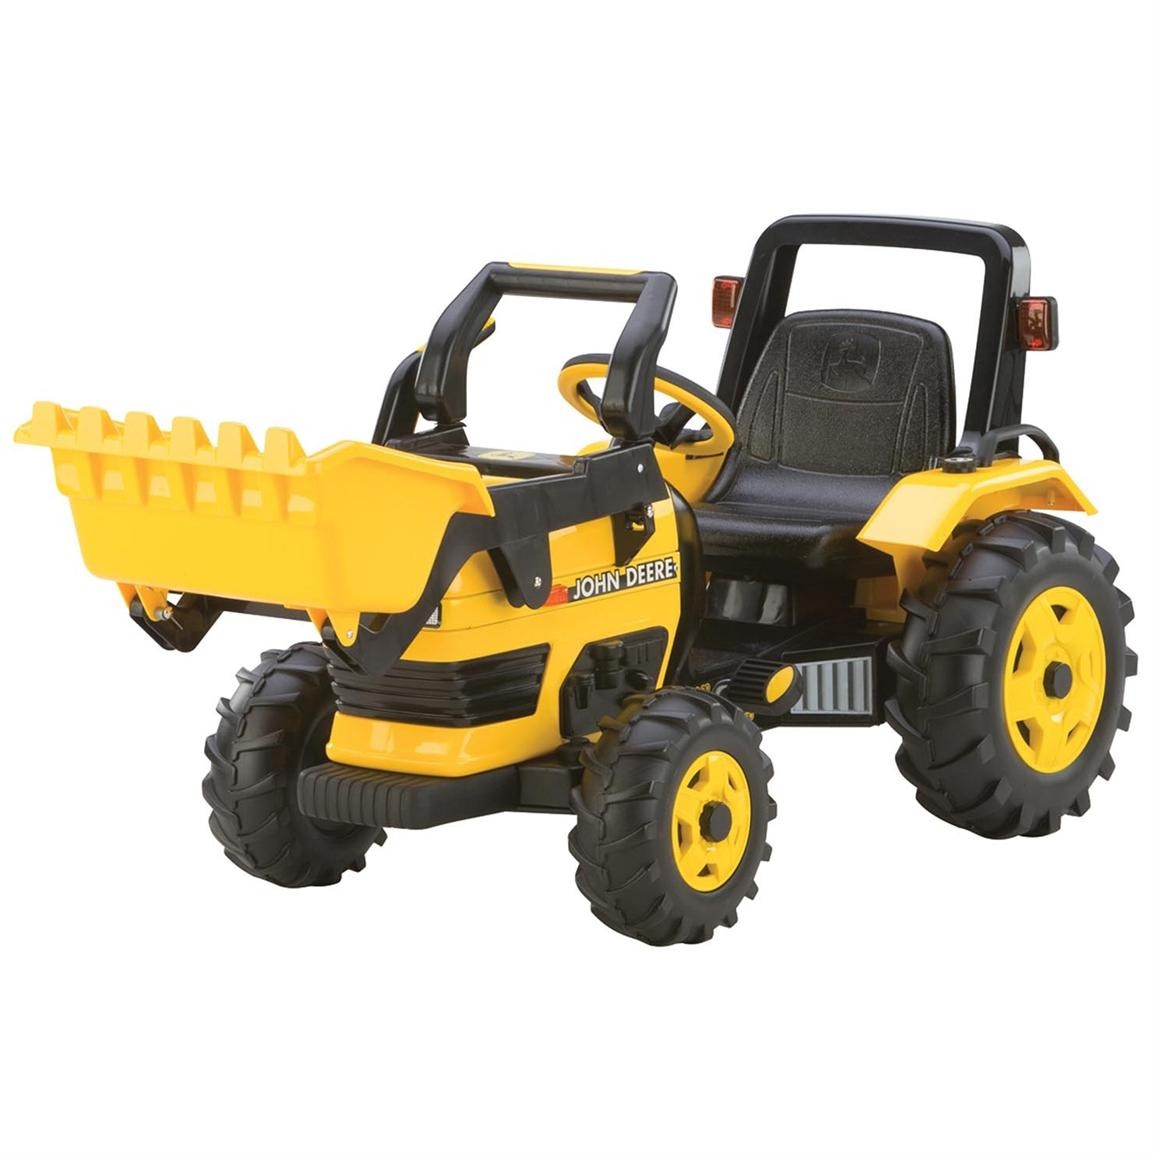 Rc2 john deere pedal powed construction loader ride on toy